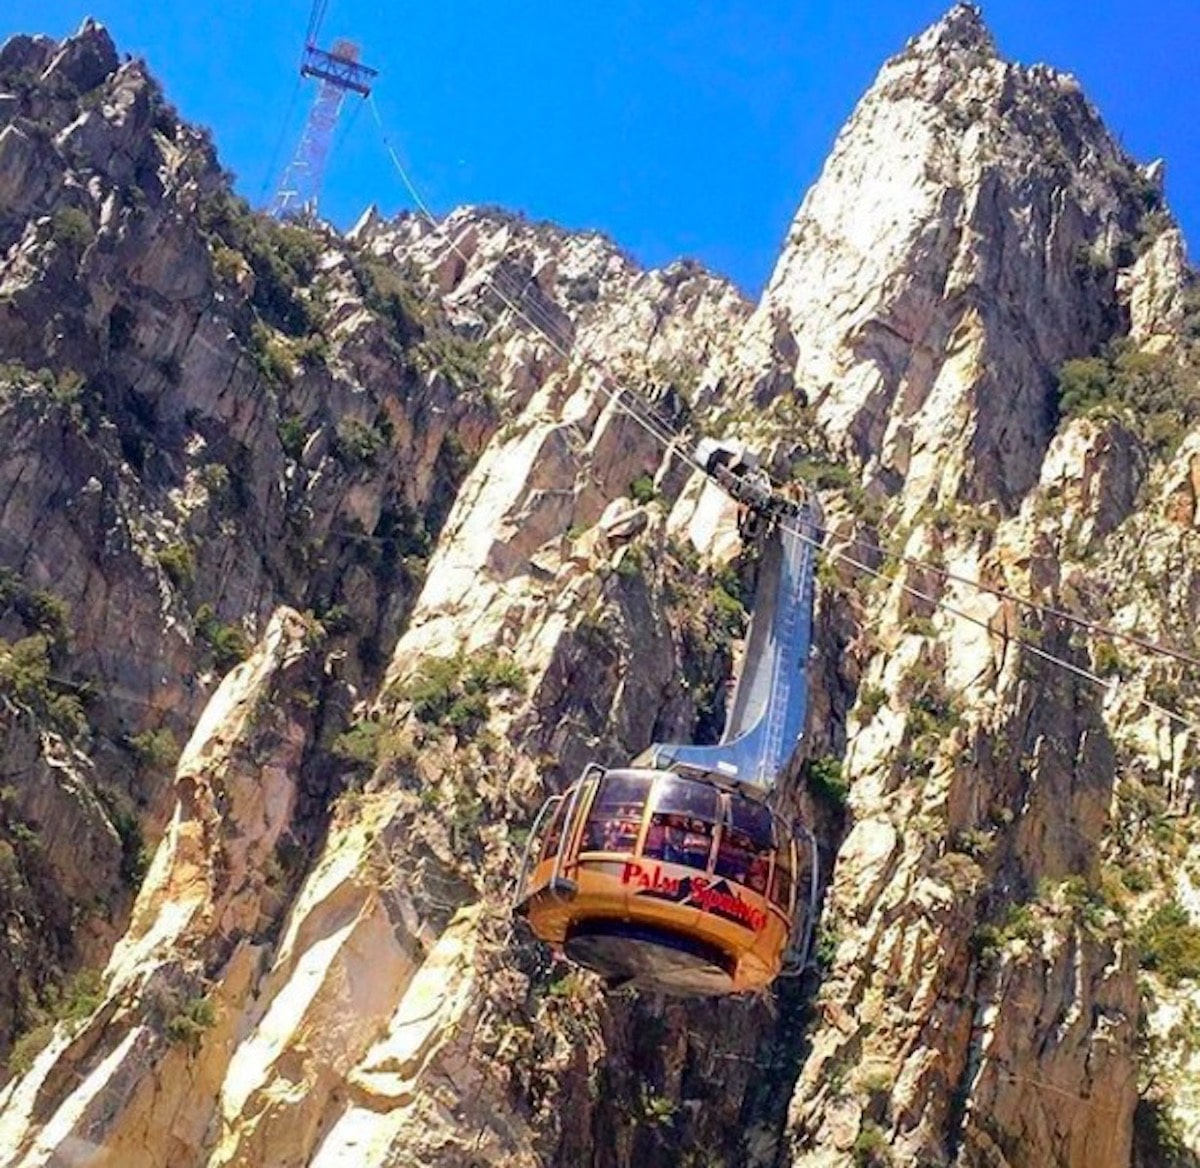 10 Tips for Visiting the Palm Springs Aerial Tramway - Cactus Hugs